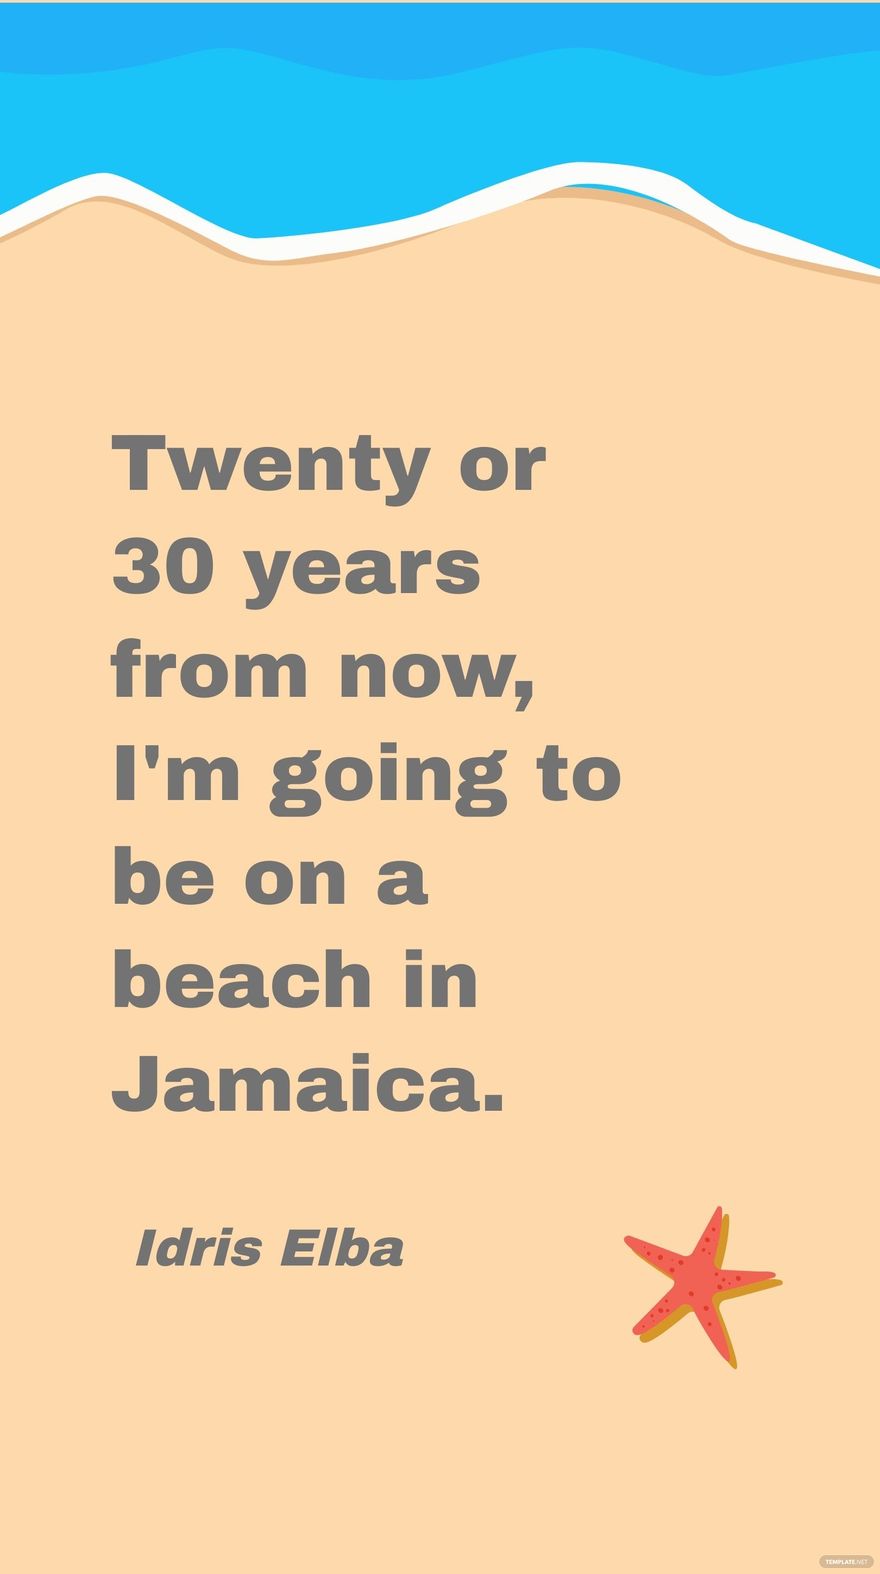 Idris Elba - Twenty or 30 years from now, I'm going to be on a beach in Jamaica. in JPG